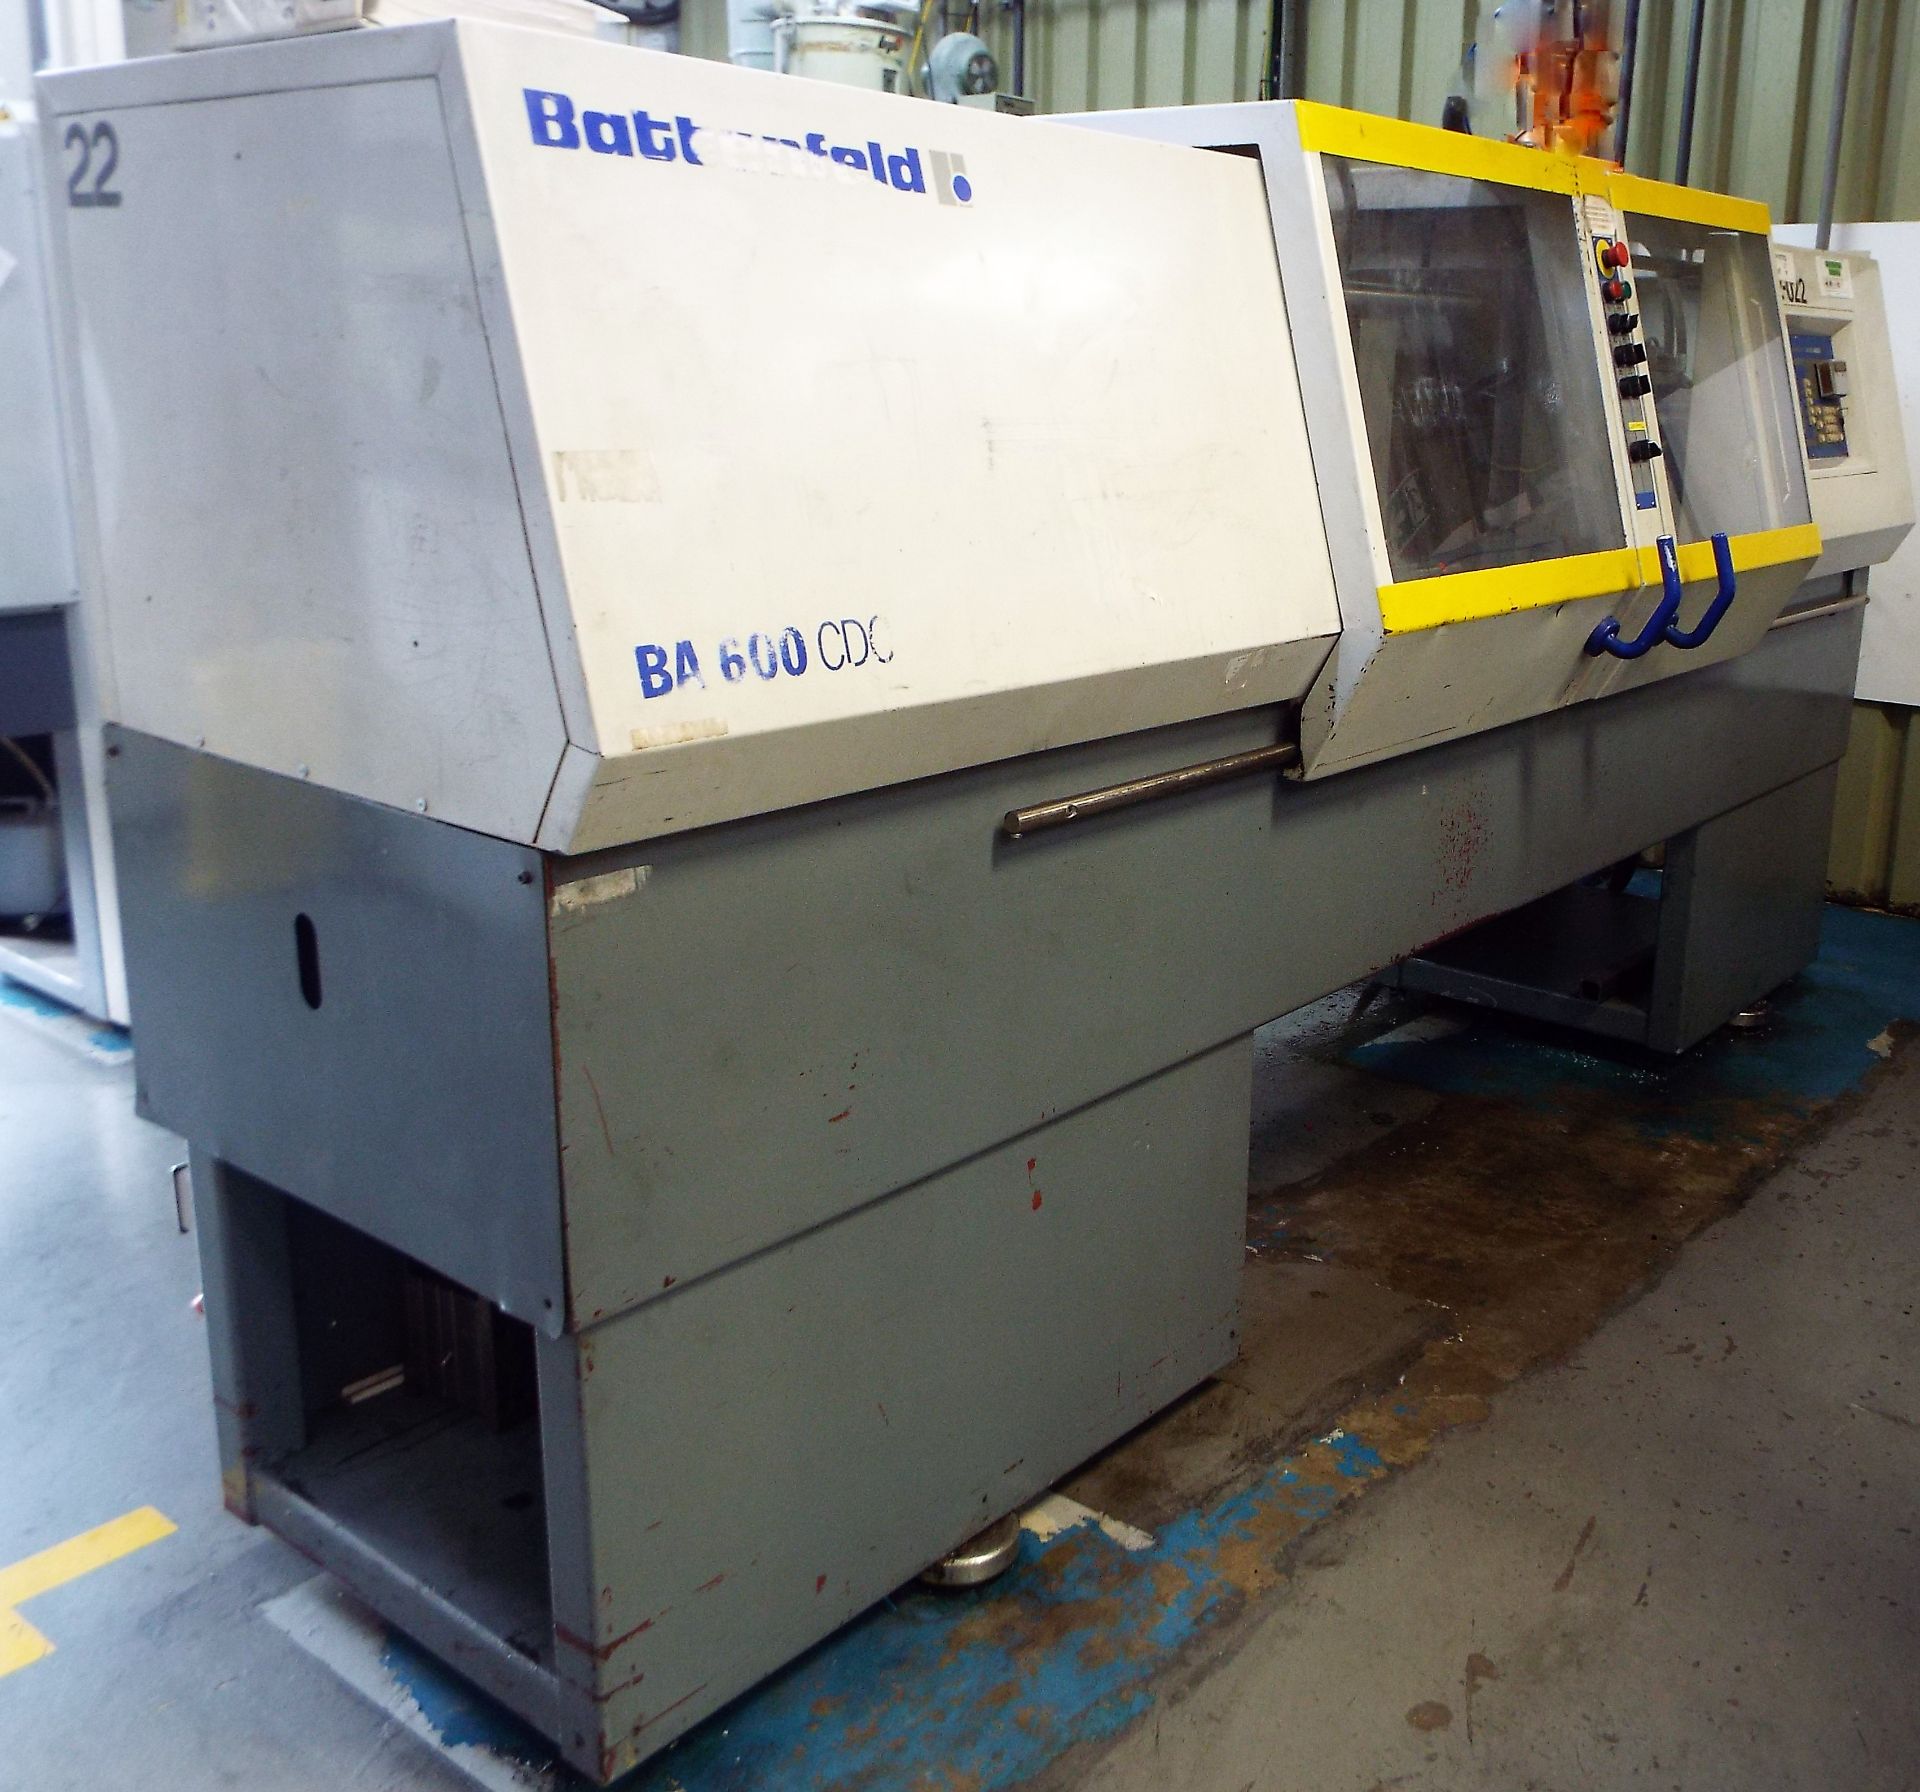 This is for a used Battenfeld BA600 CDC Plus Plastic Injection Moulding Machine cw Unilog 4000B